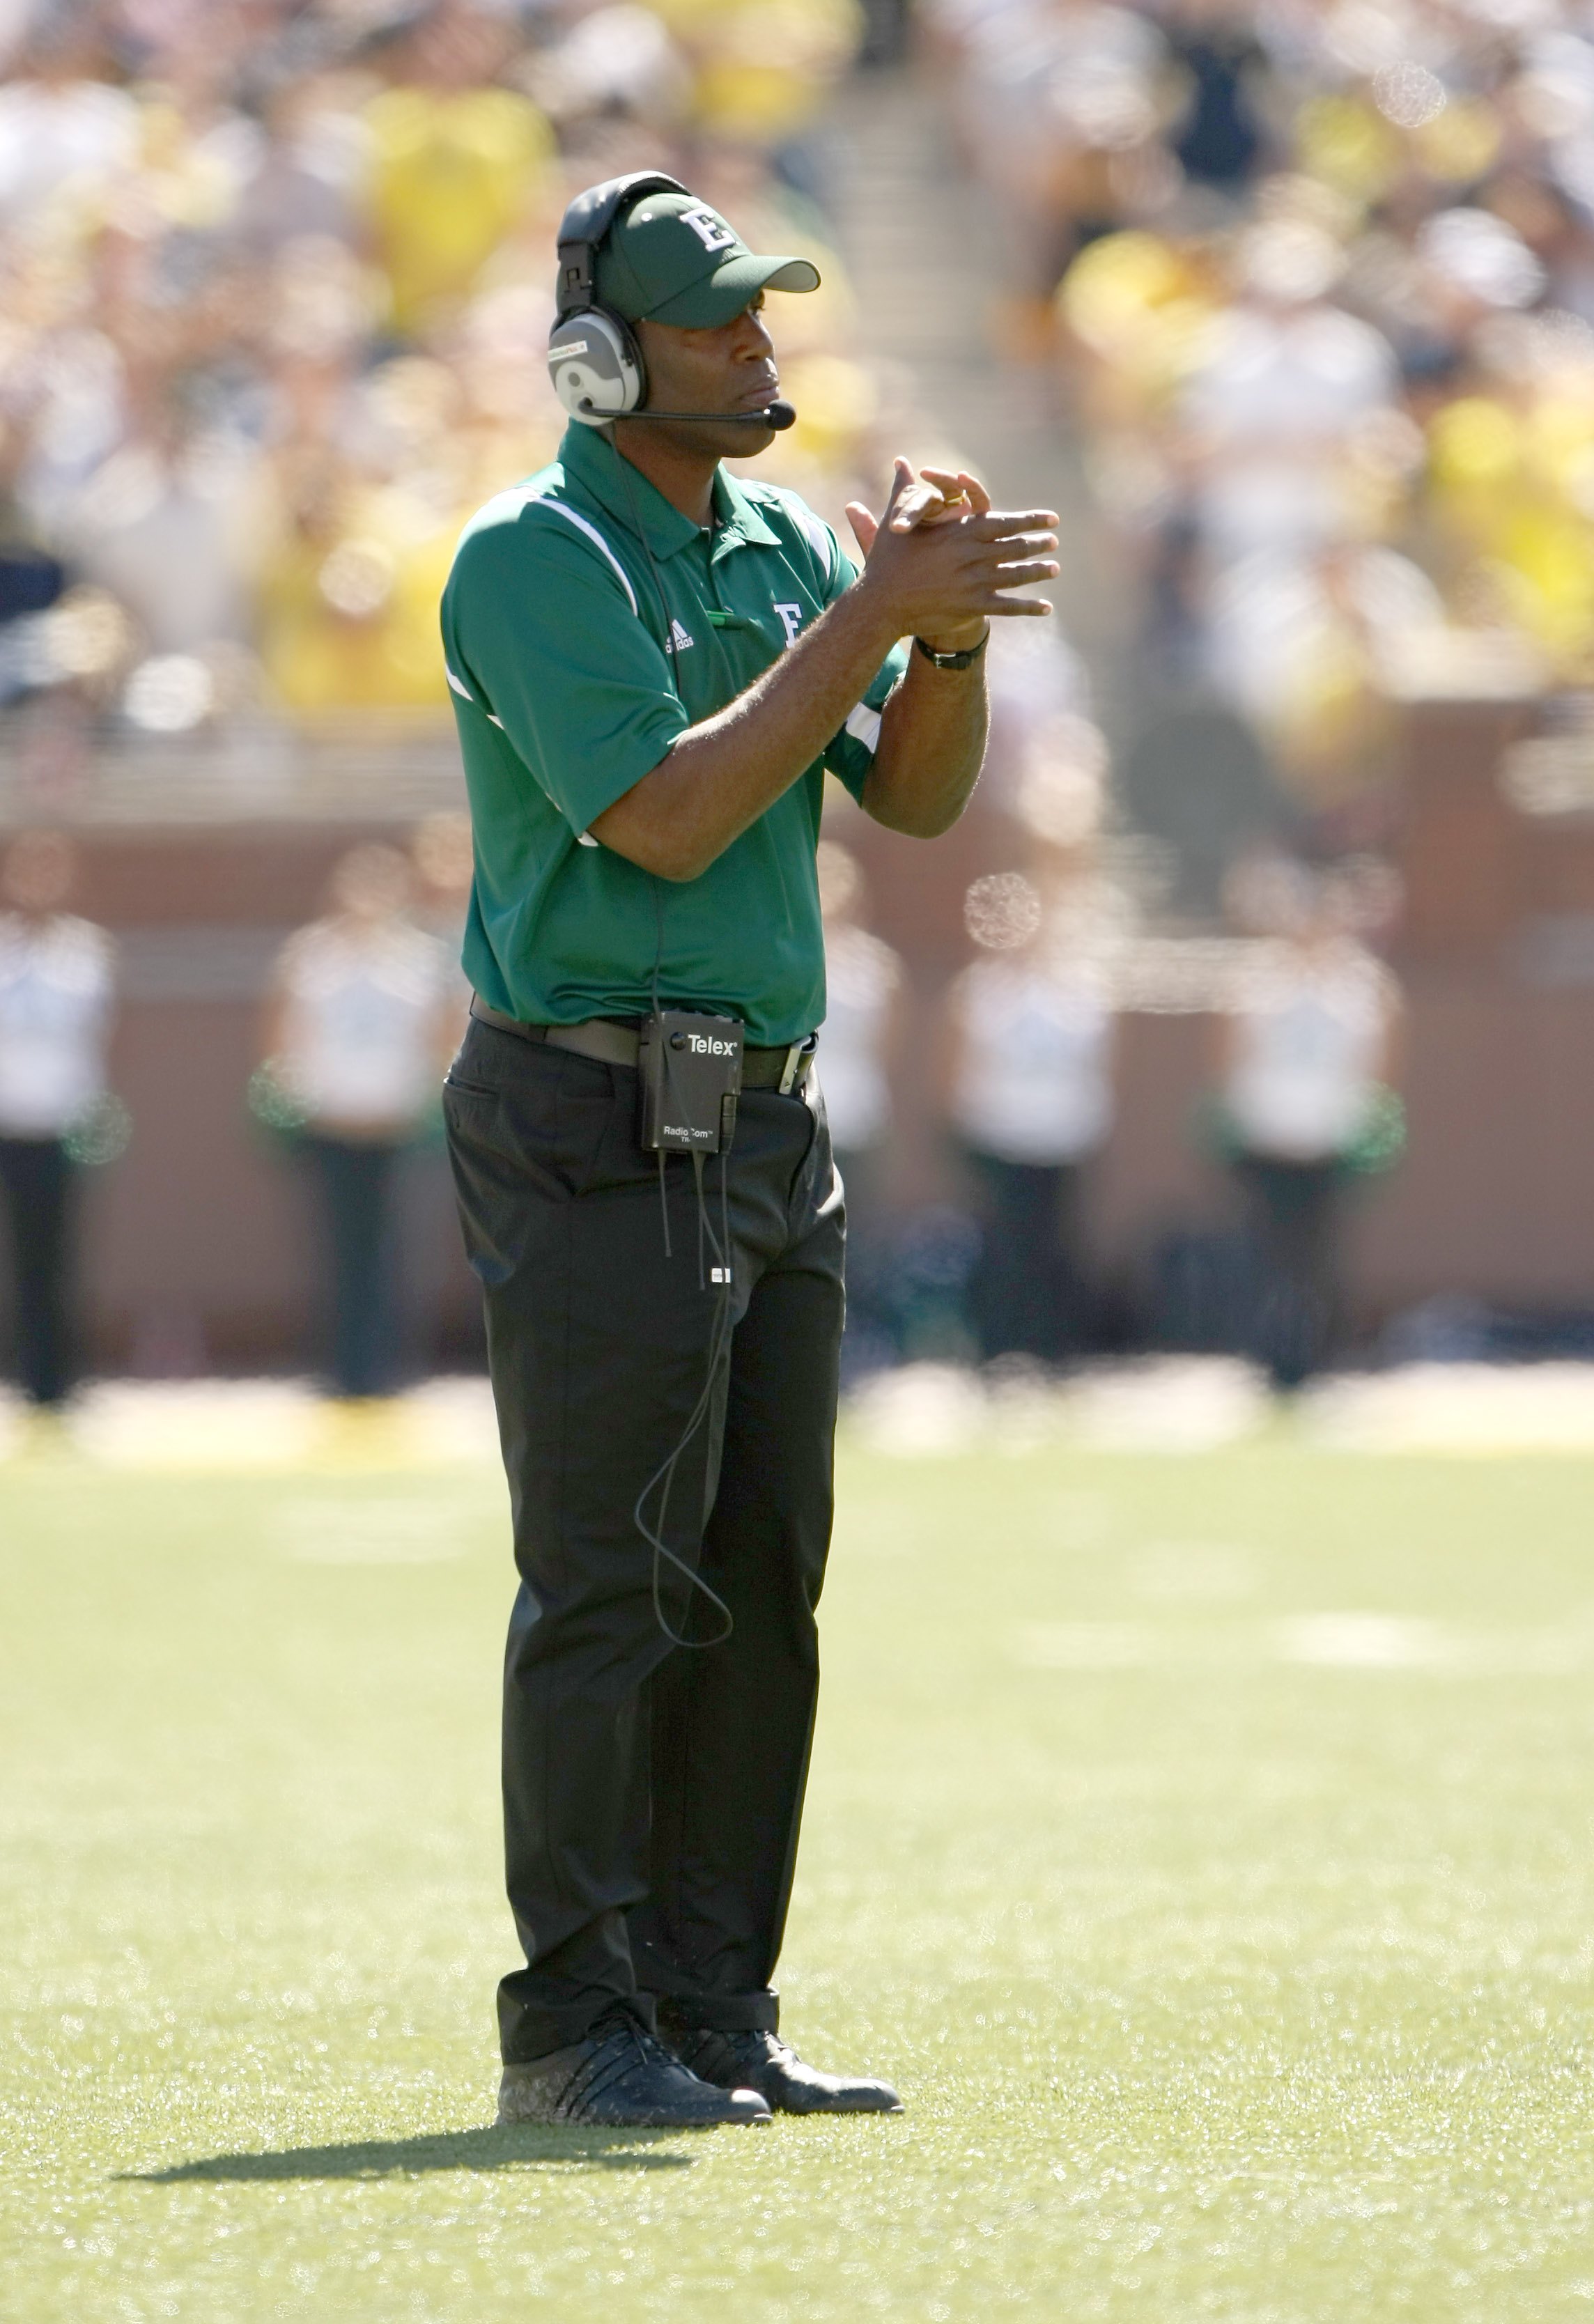 ANN ARBOR, MI - SEPTEMBER 19:  Head coach Ron English stands on the field during the game with the Michigan Wolverines at Michigan Stadium on September 19, 2009 in Ann Arbor, Michigan.  Michigan won 45-17.  (Photo by Stephen Dunn/Getty Images)